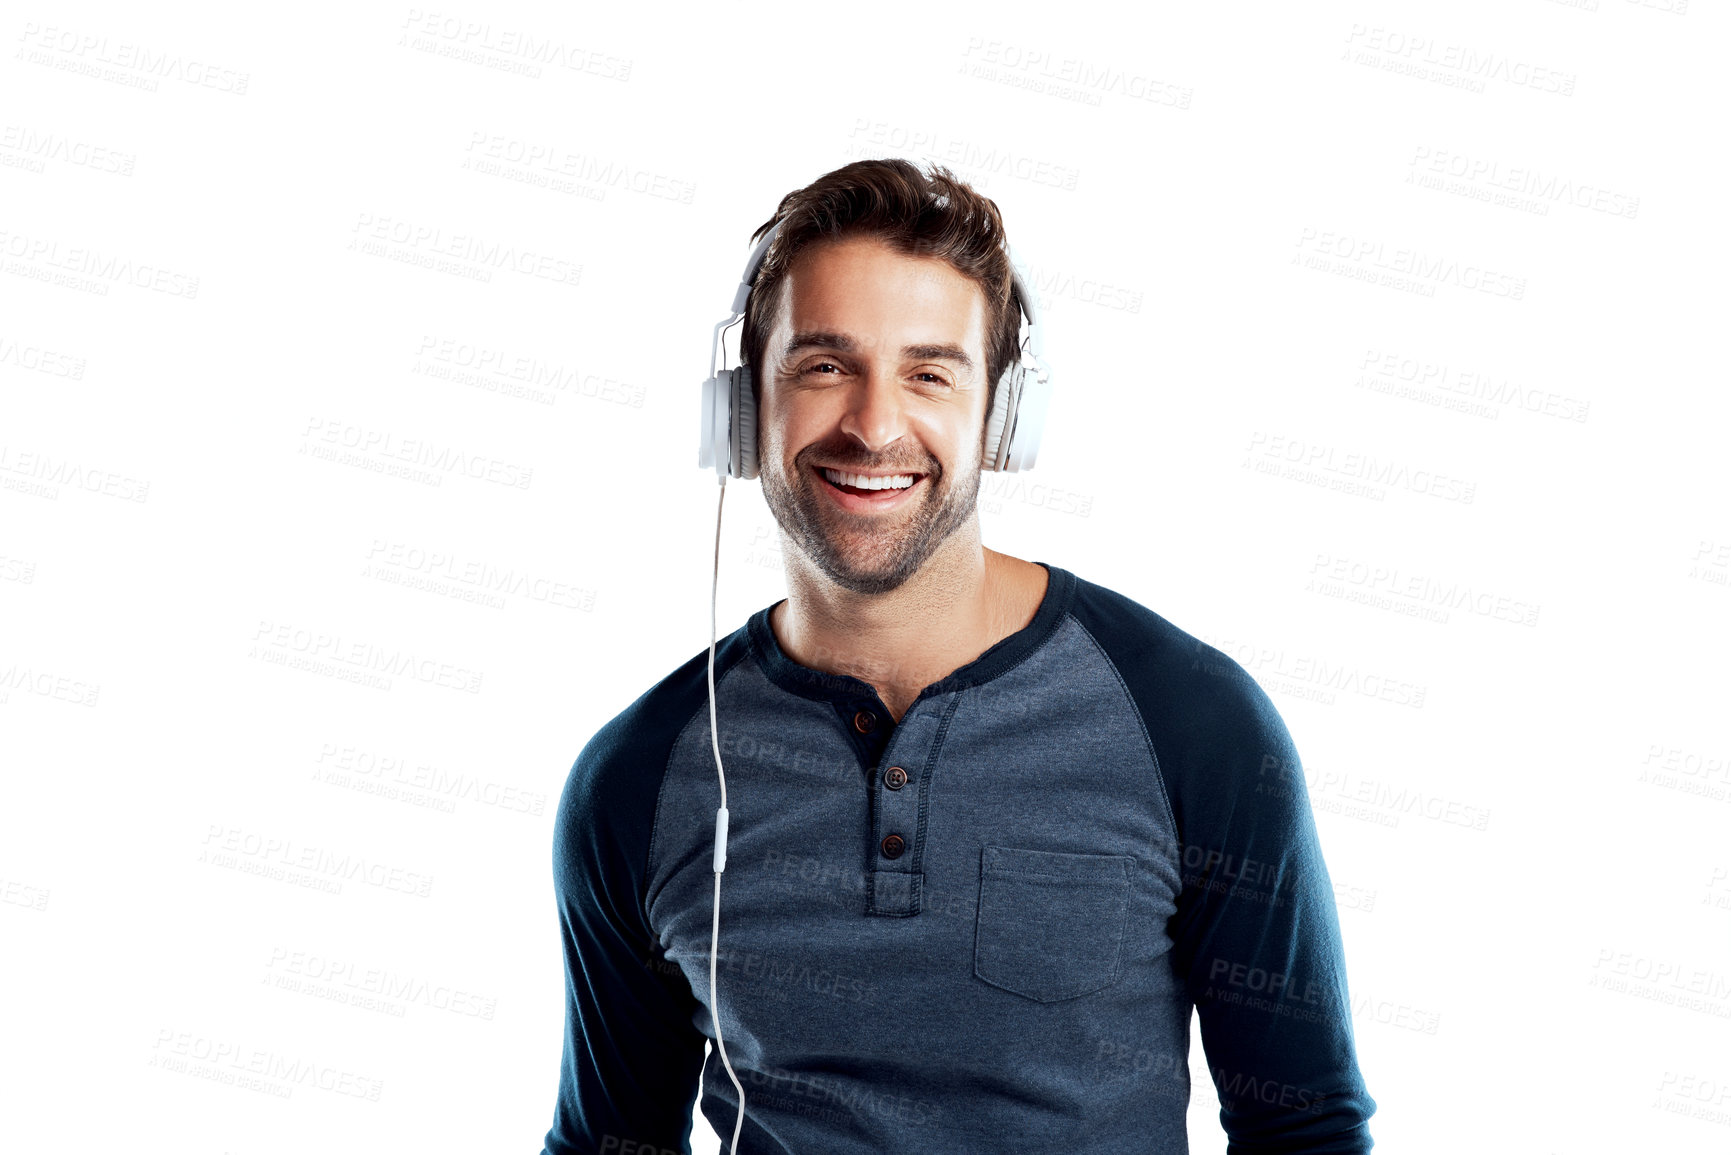 Buy stock photo Studio portrait of a handsome young man using headphones against a white background